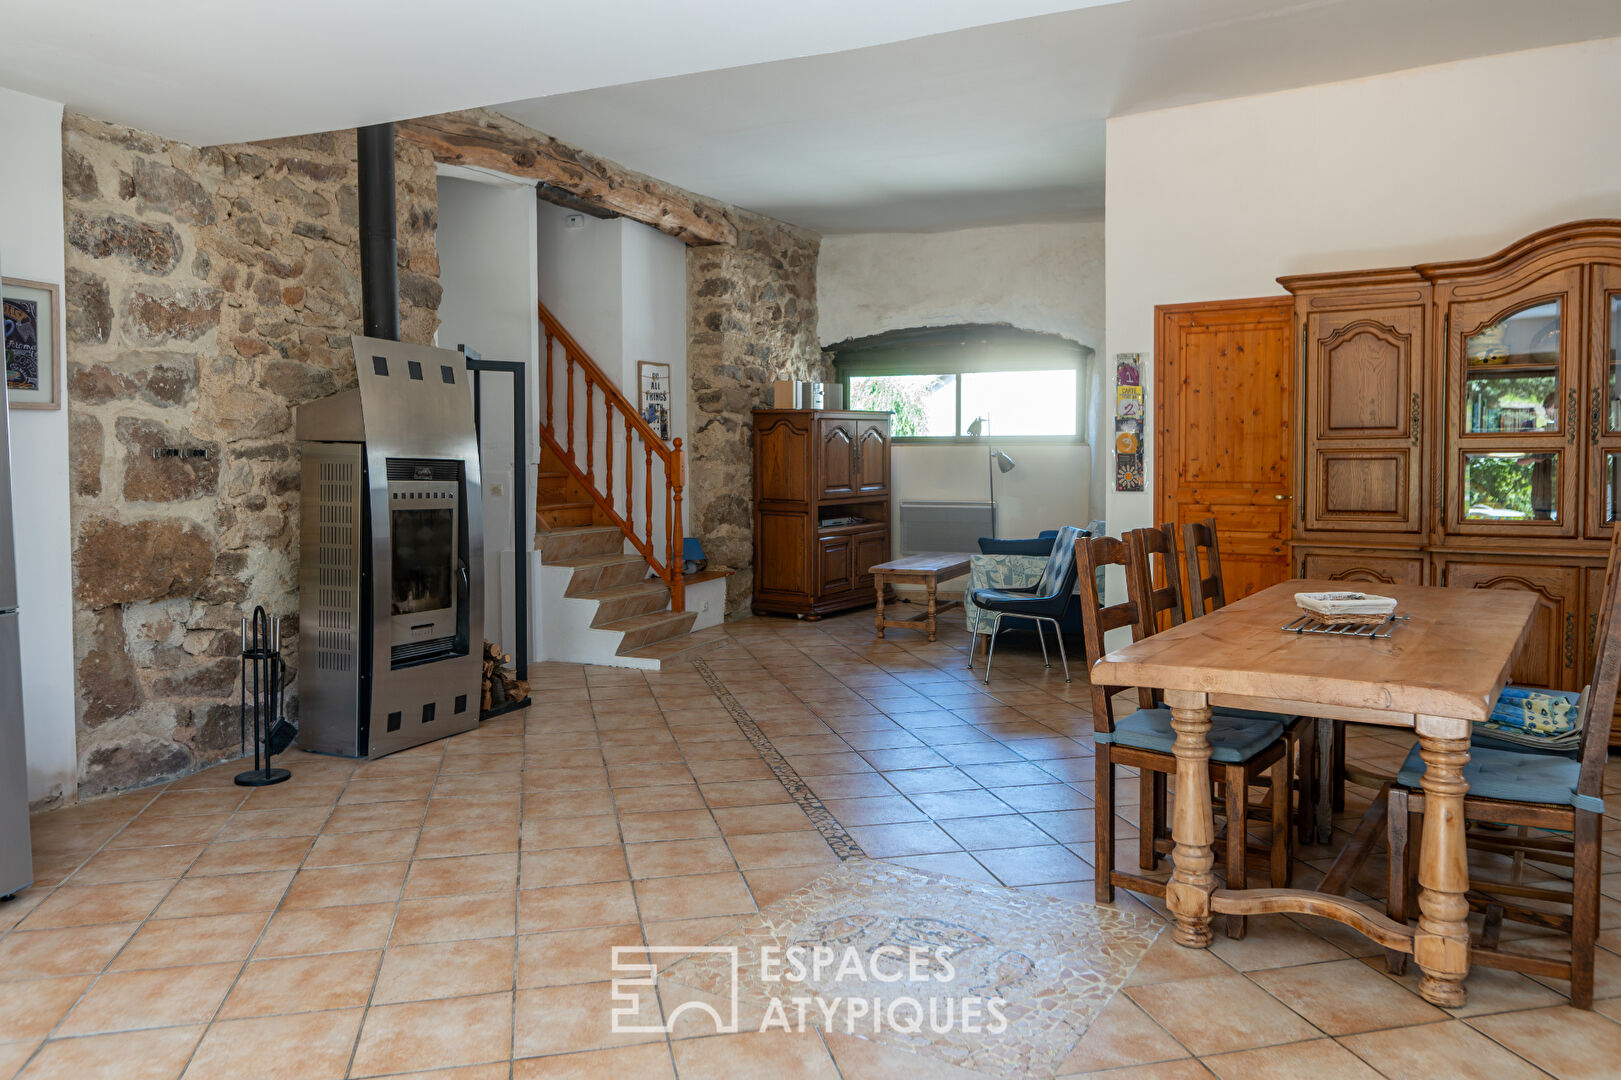 Property with 4 gîtes in the Ardèche near Valence